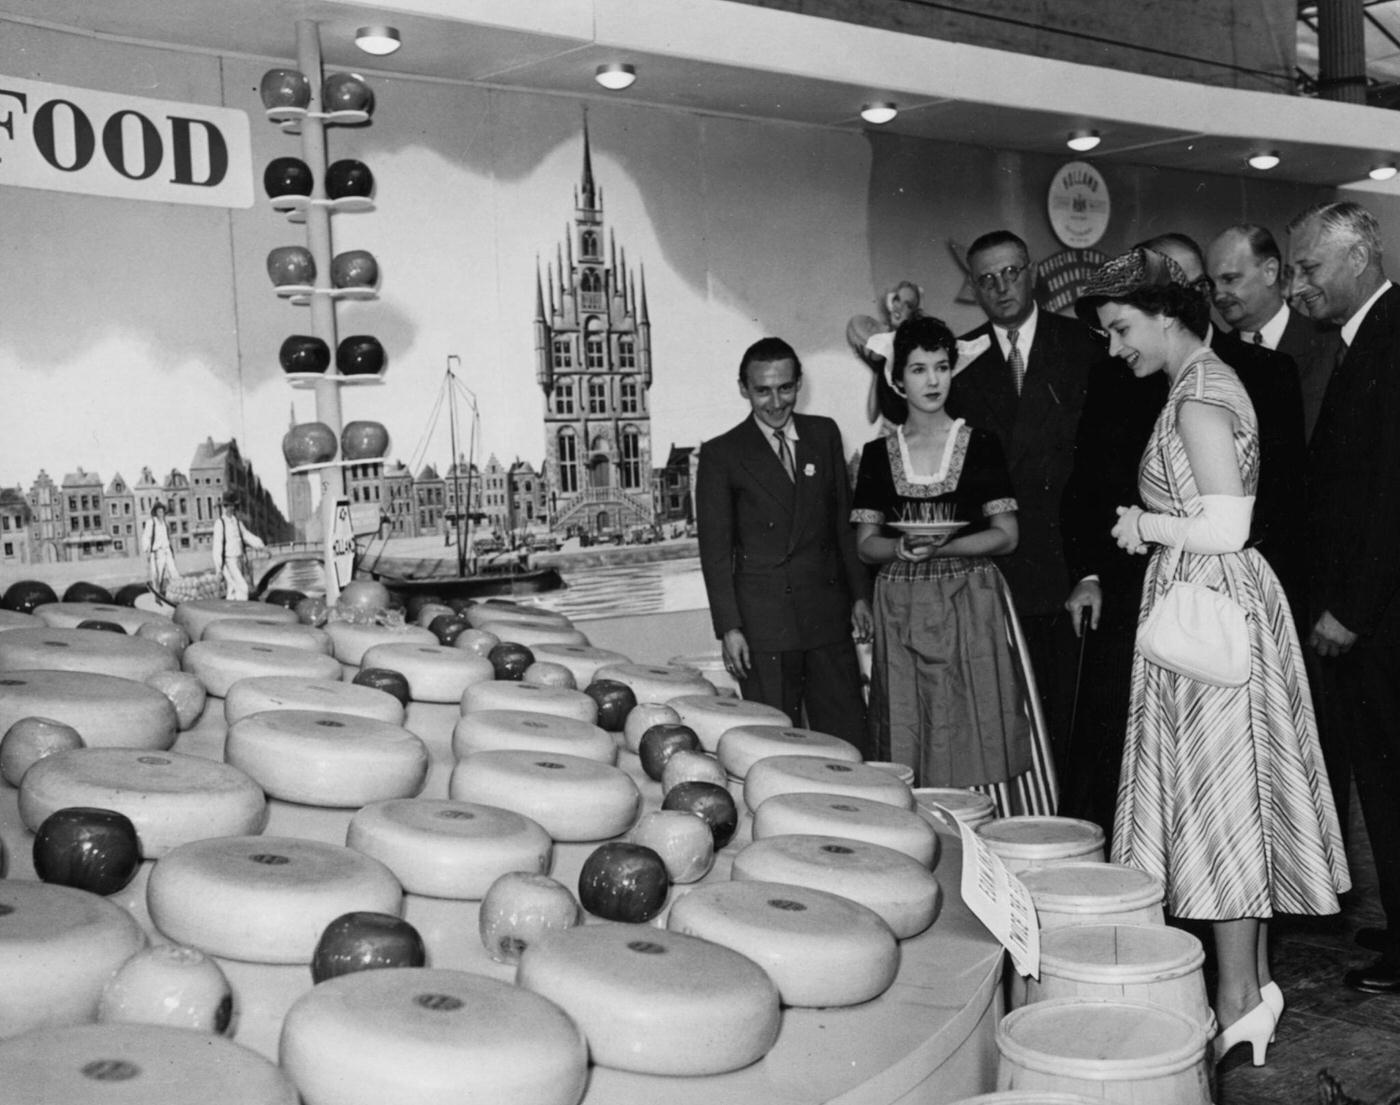 Queen Elizabeth II admires a display of Dutch cheese wheels on the Netherlands exhibit at the British Food Fair at Olympia in London, 1952.